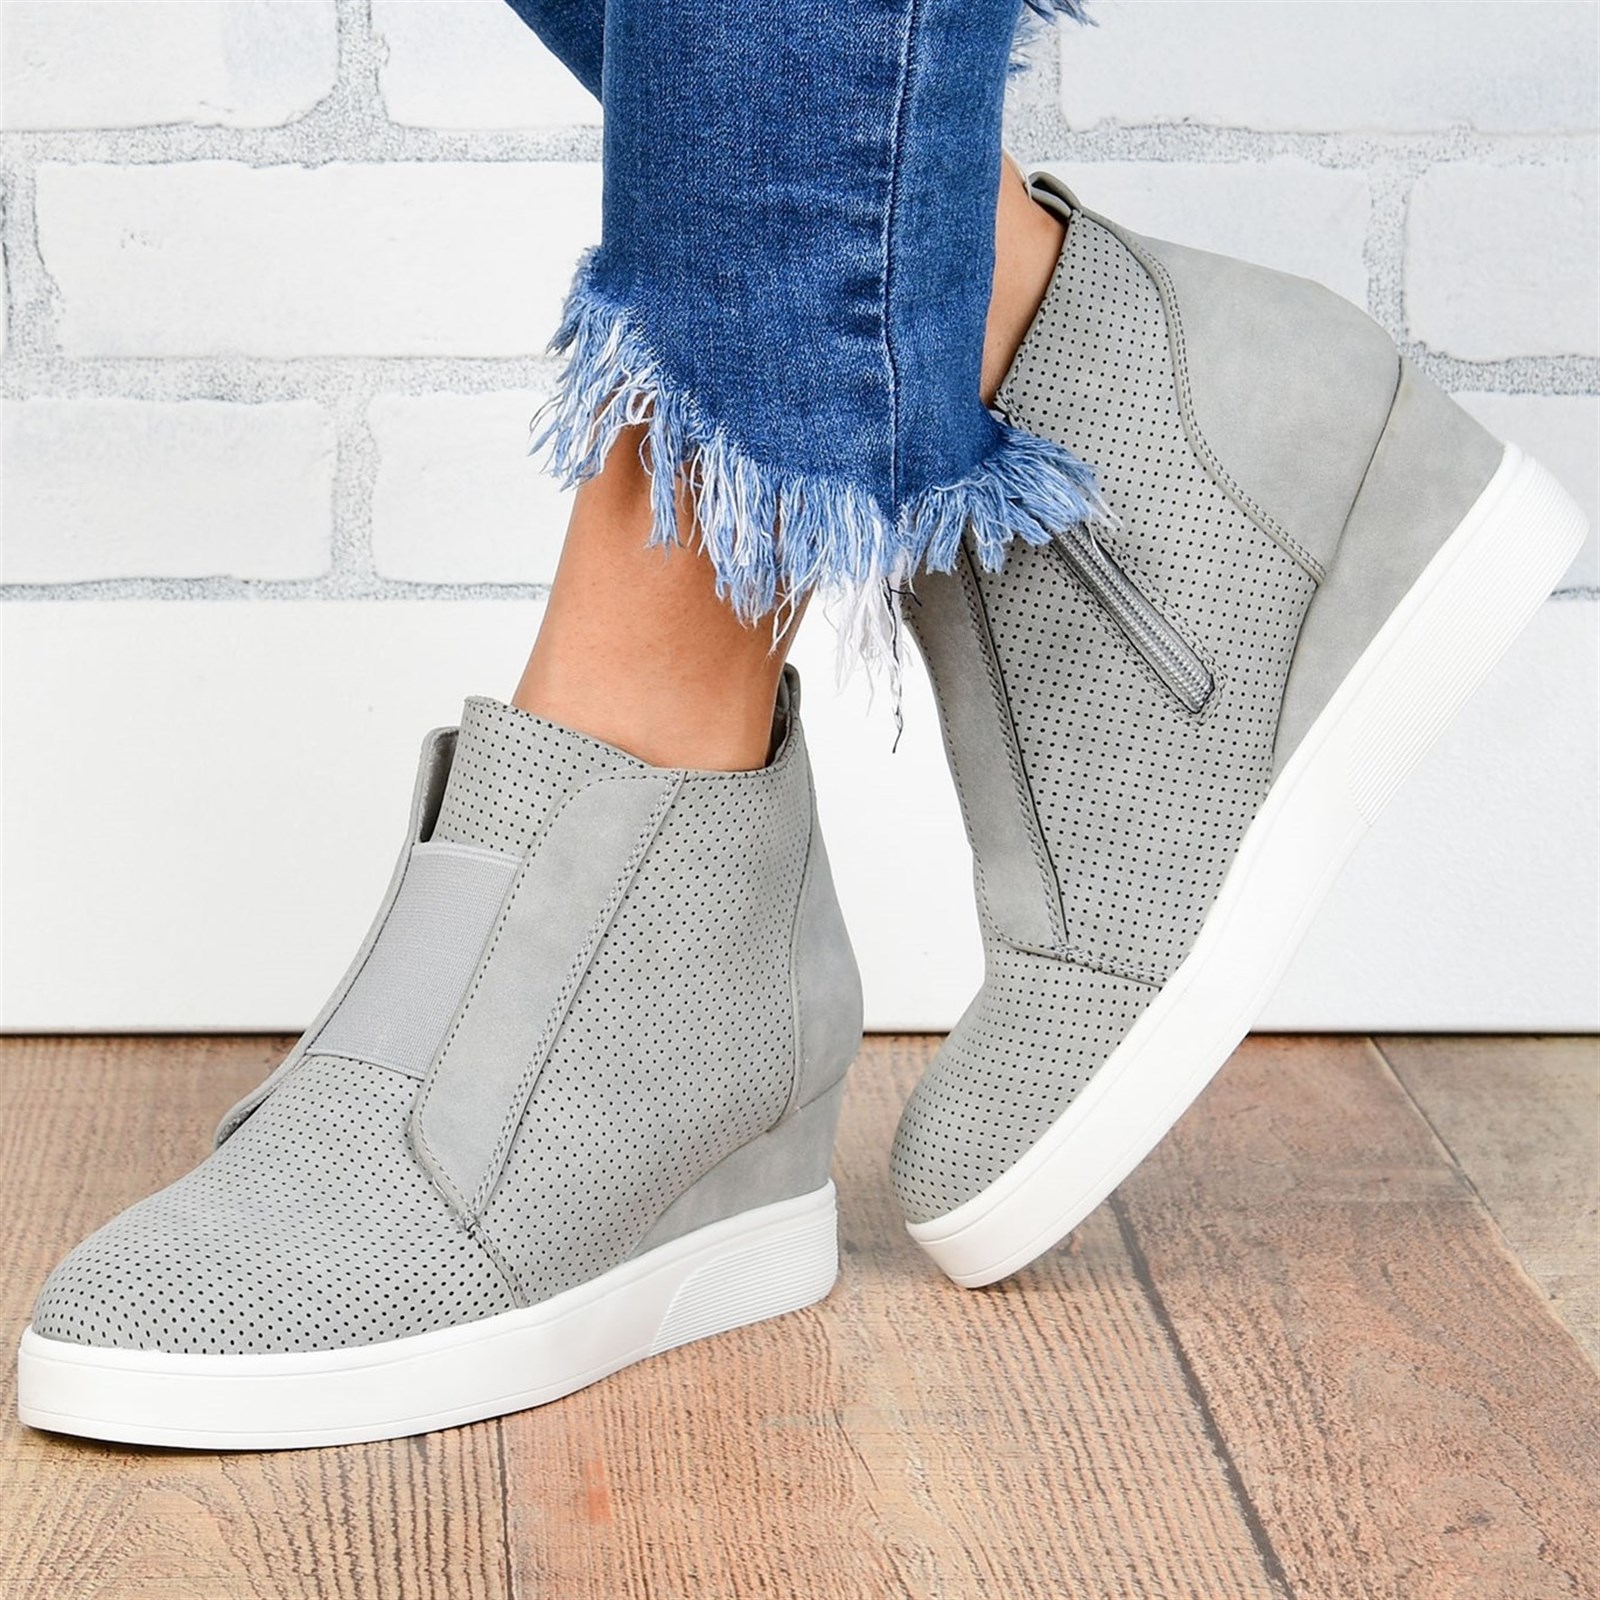 Sneaker Wedges ONLY $40.98 SHIPPED {Reg $84.99}